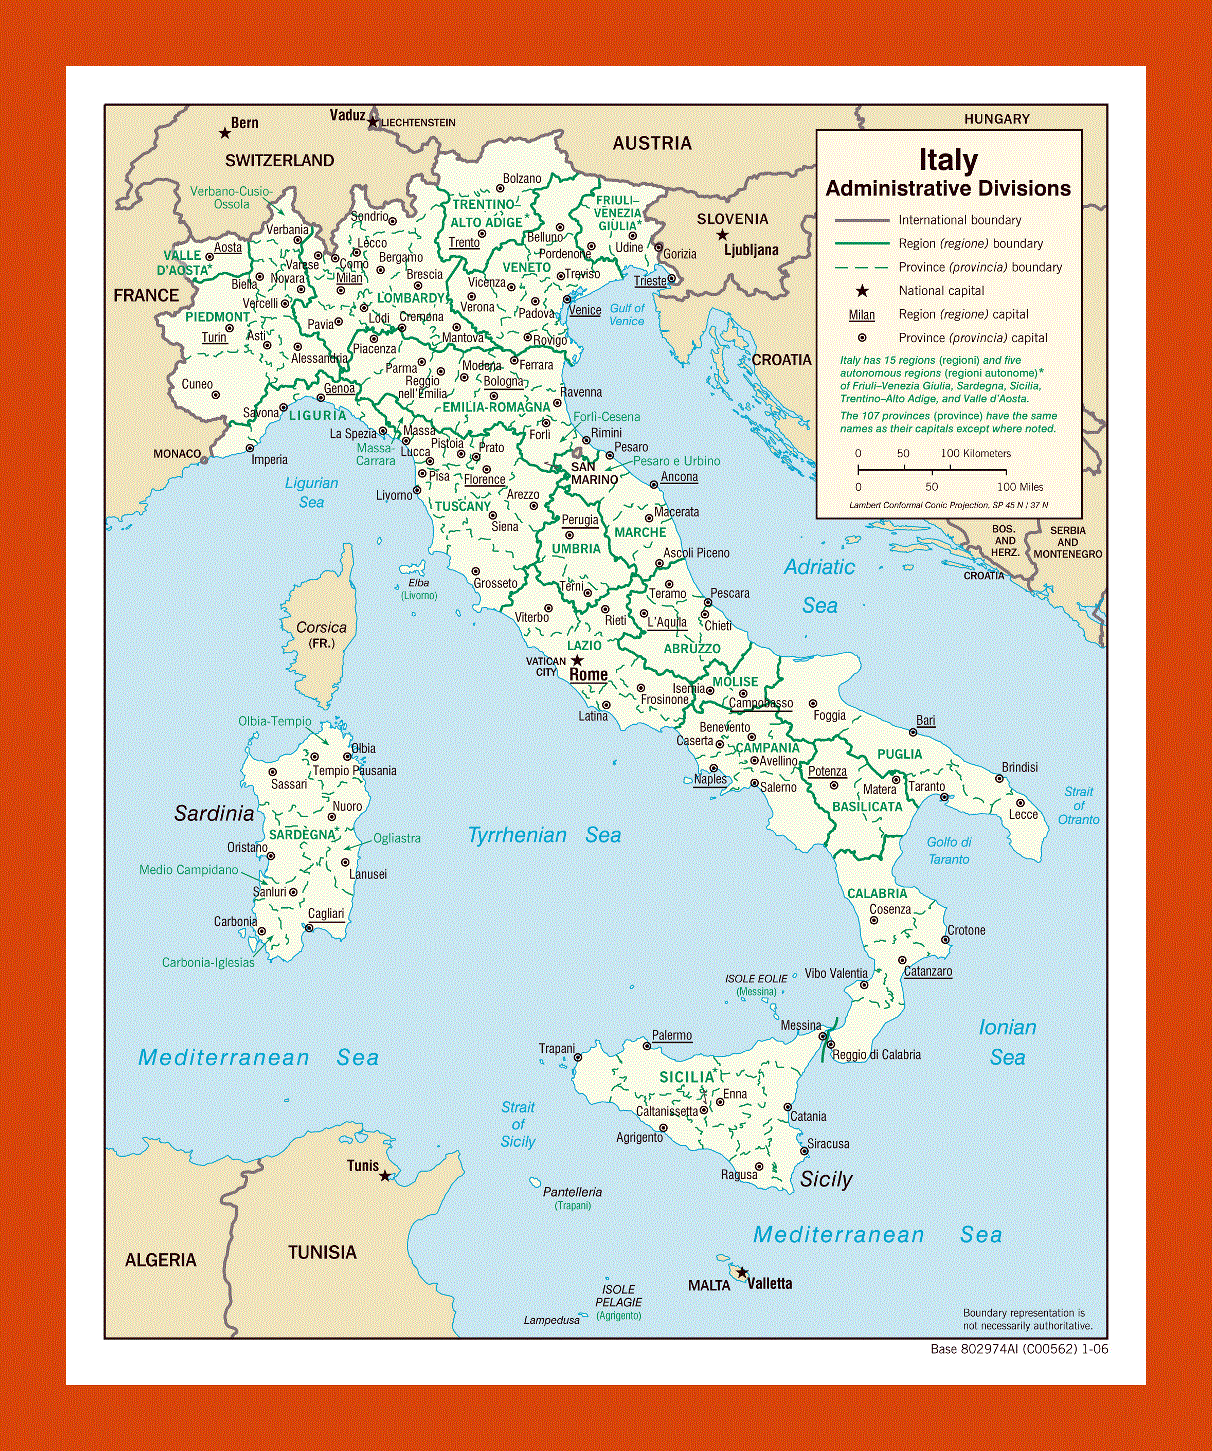 Administrative divisions map of Italy - 2006